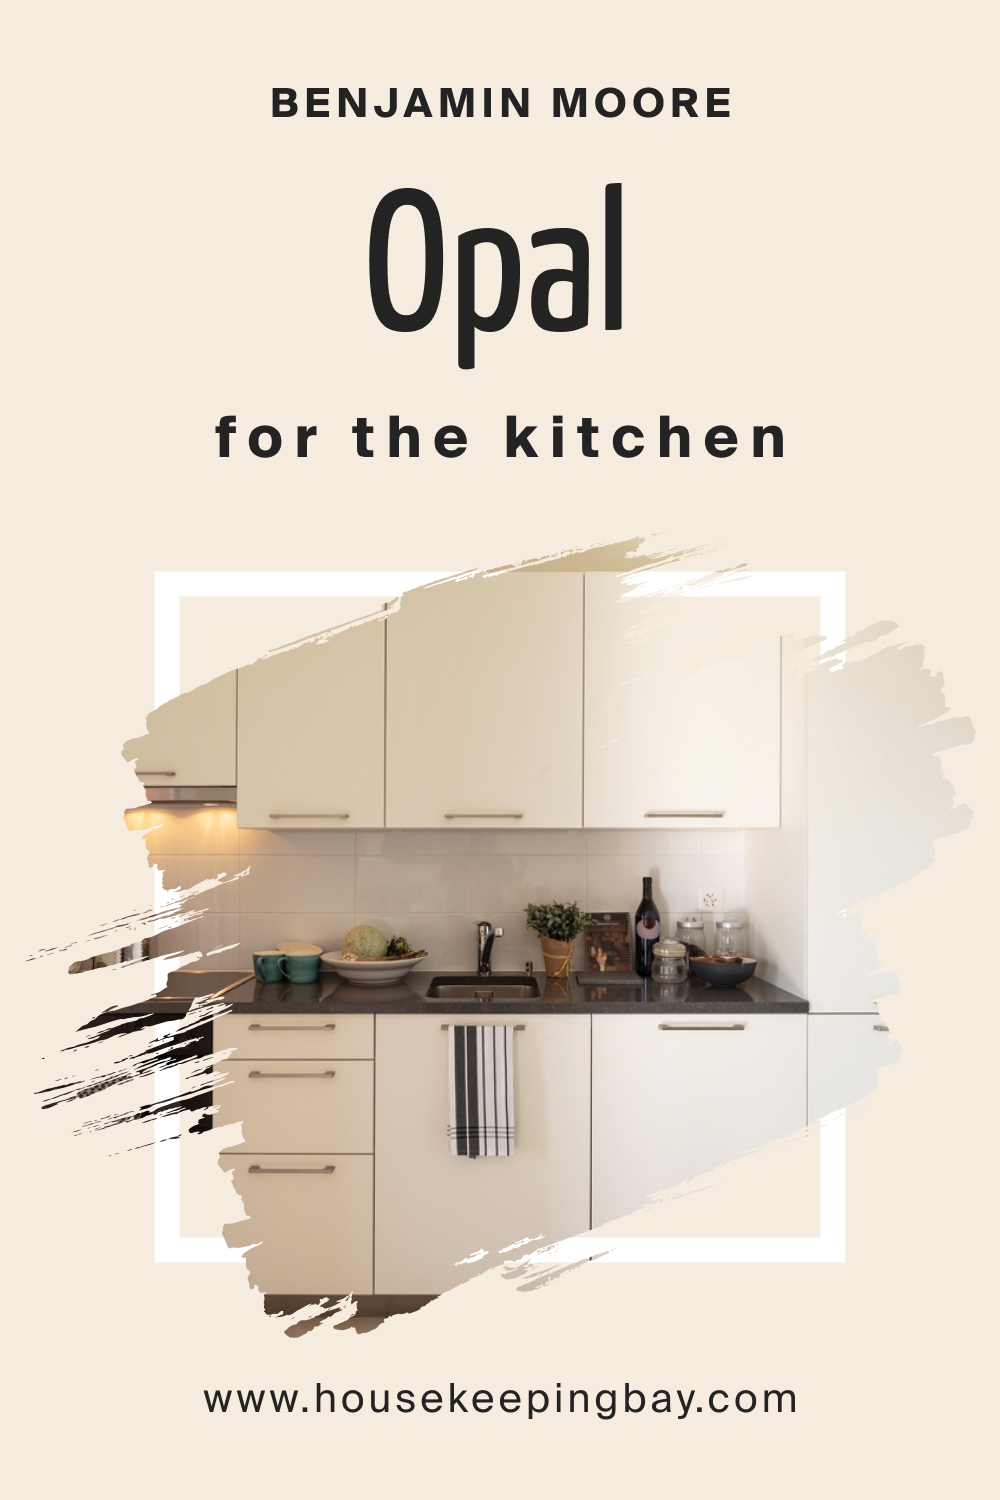 Benjamin Moore. Opal OC 73 for the Kitchen